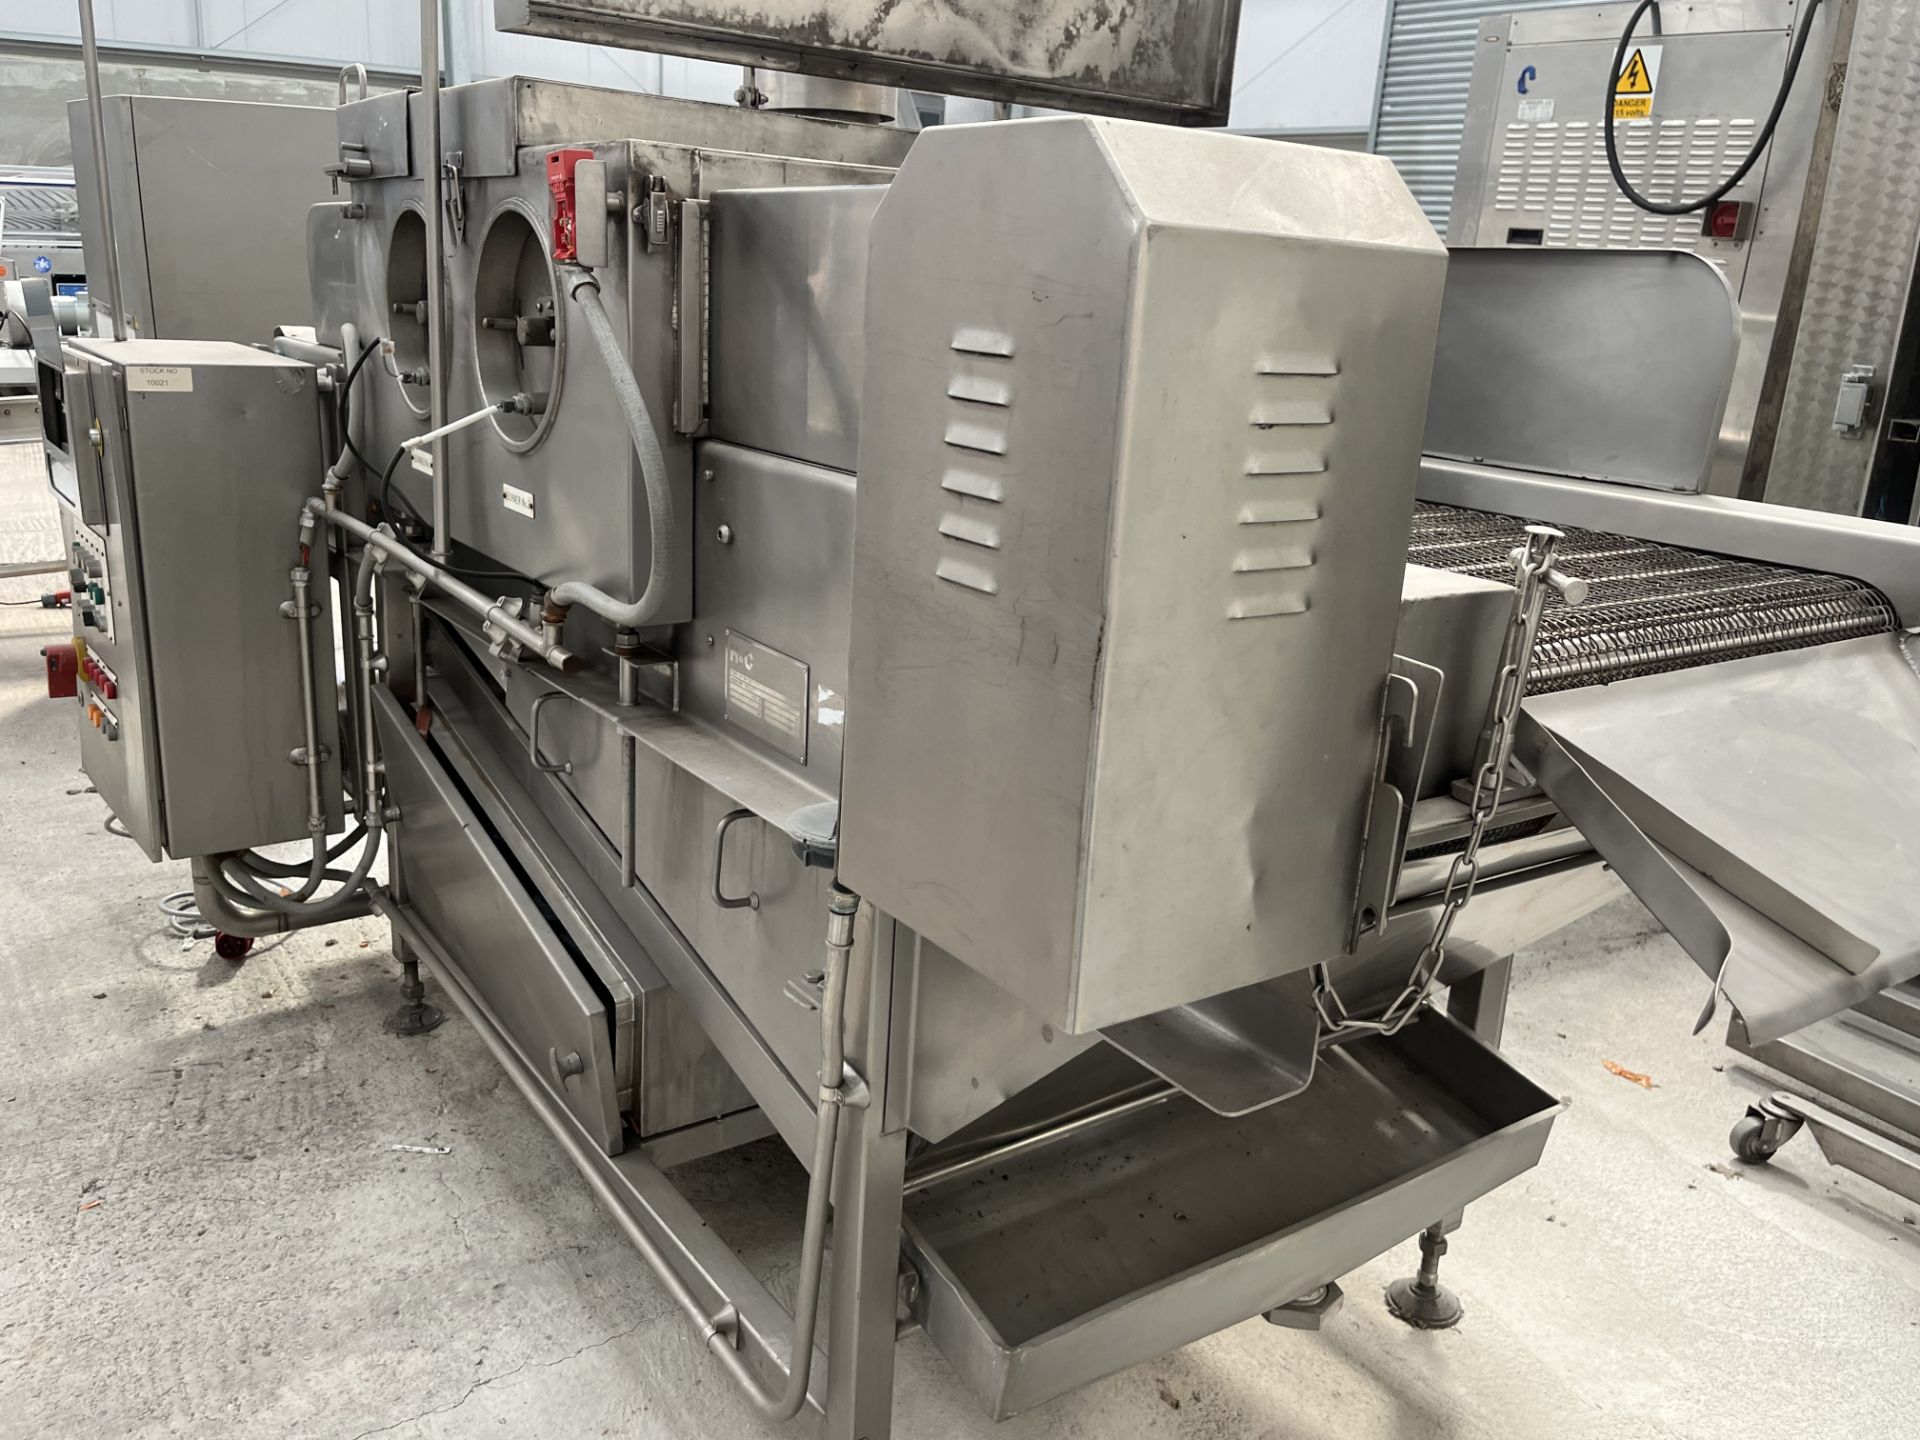 H+C INLINE TOP + BOTTOM GAS OVEN  3 PHASE POWER  600mm WIDE WIRE CONVEYER  HEIGHT - approx - - Image 4 of 11